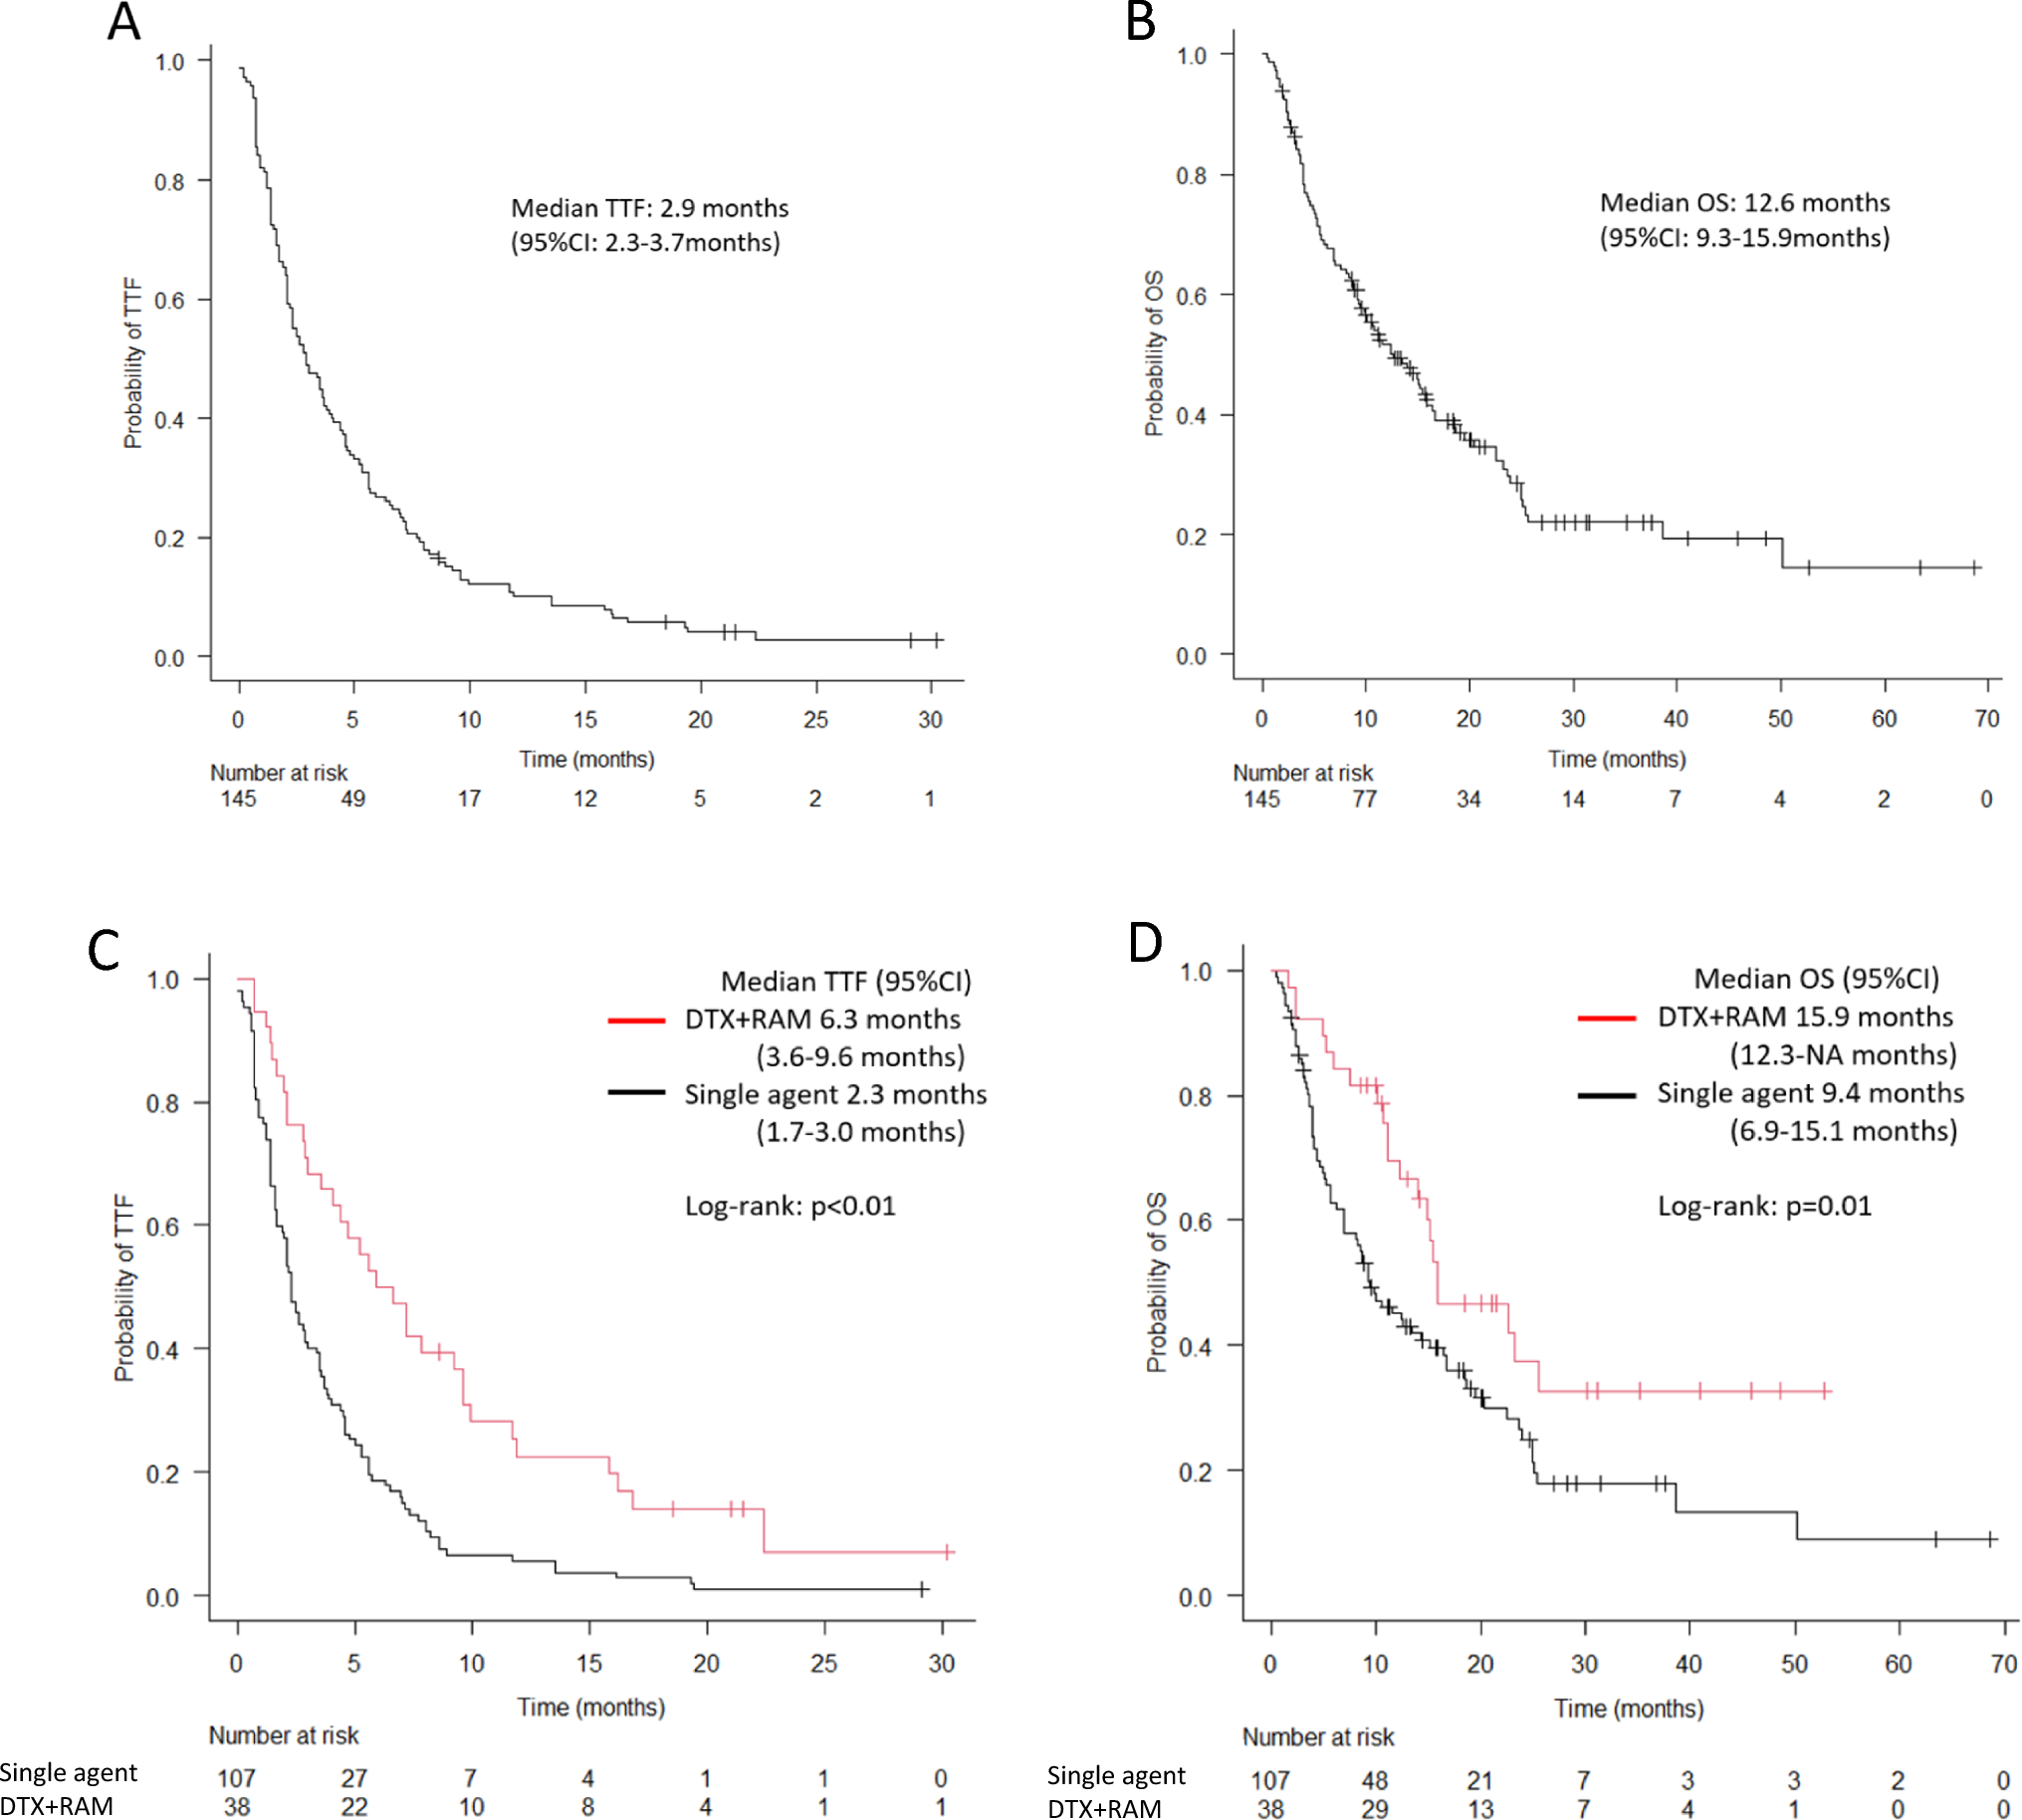 Efficacy and Safety of Docetaxel plus Ramucirumab for Patients with Pretreated Advanced or Recurrent Non-small Cell Lung Cancer: Focus on Older Patients